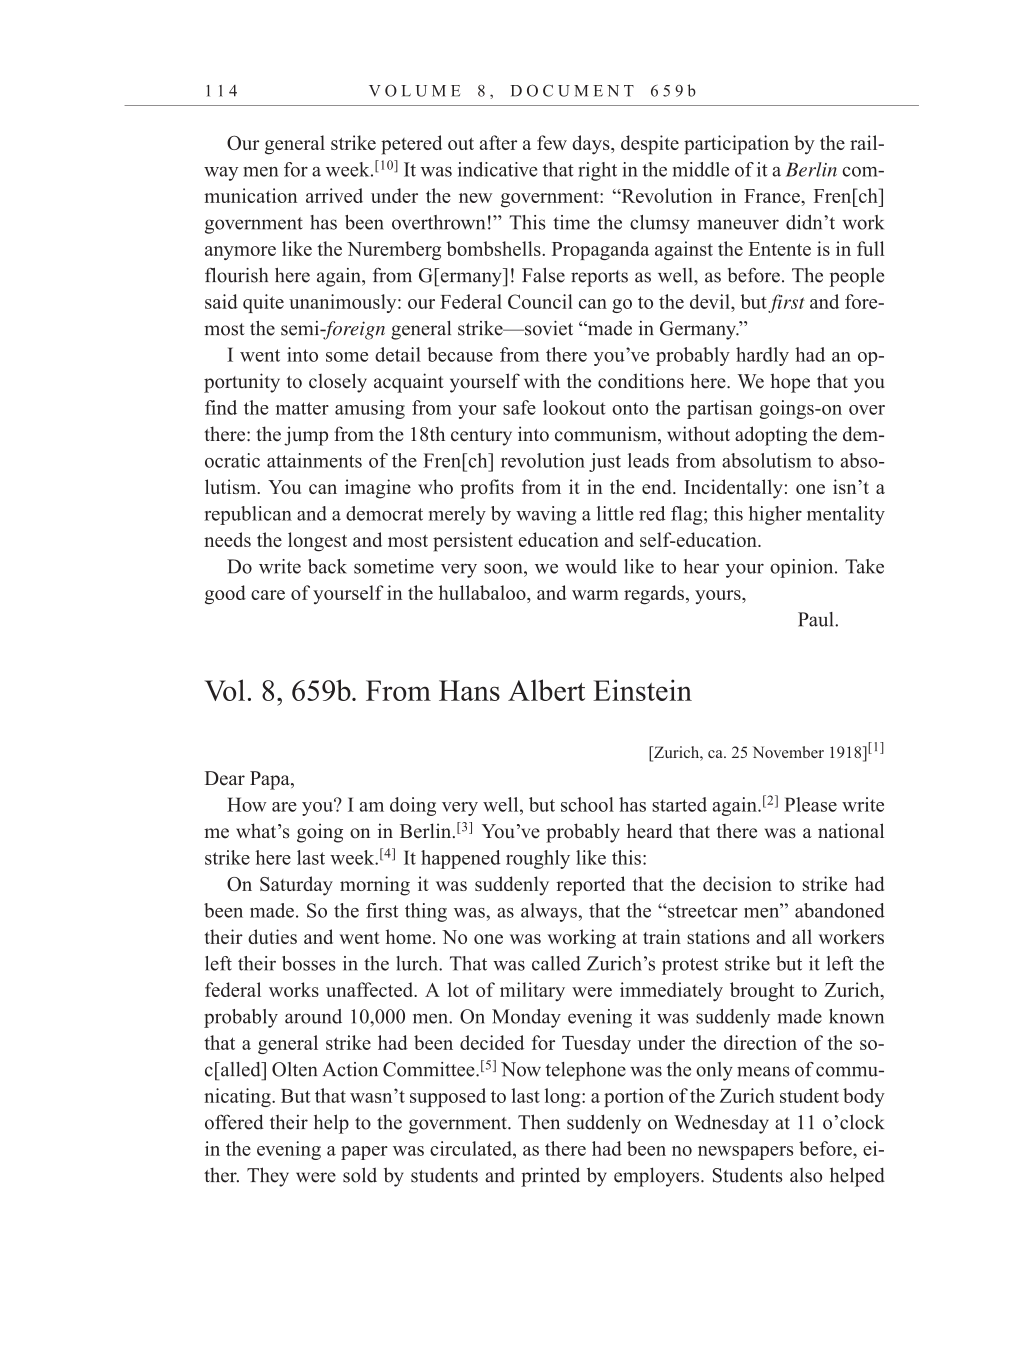 Volume 10: The Berlin Years: Correspondence, May-December 1920, and Supplementary Correspondence, 1909-1920 (English translation supplement) page 114